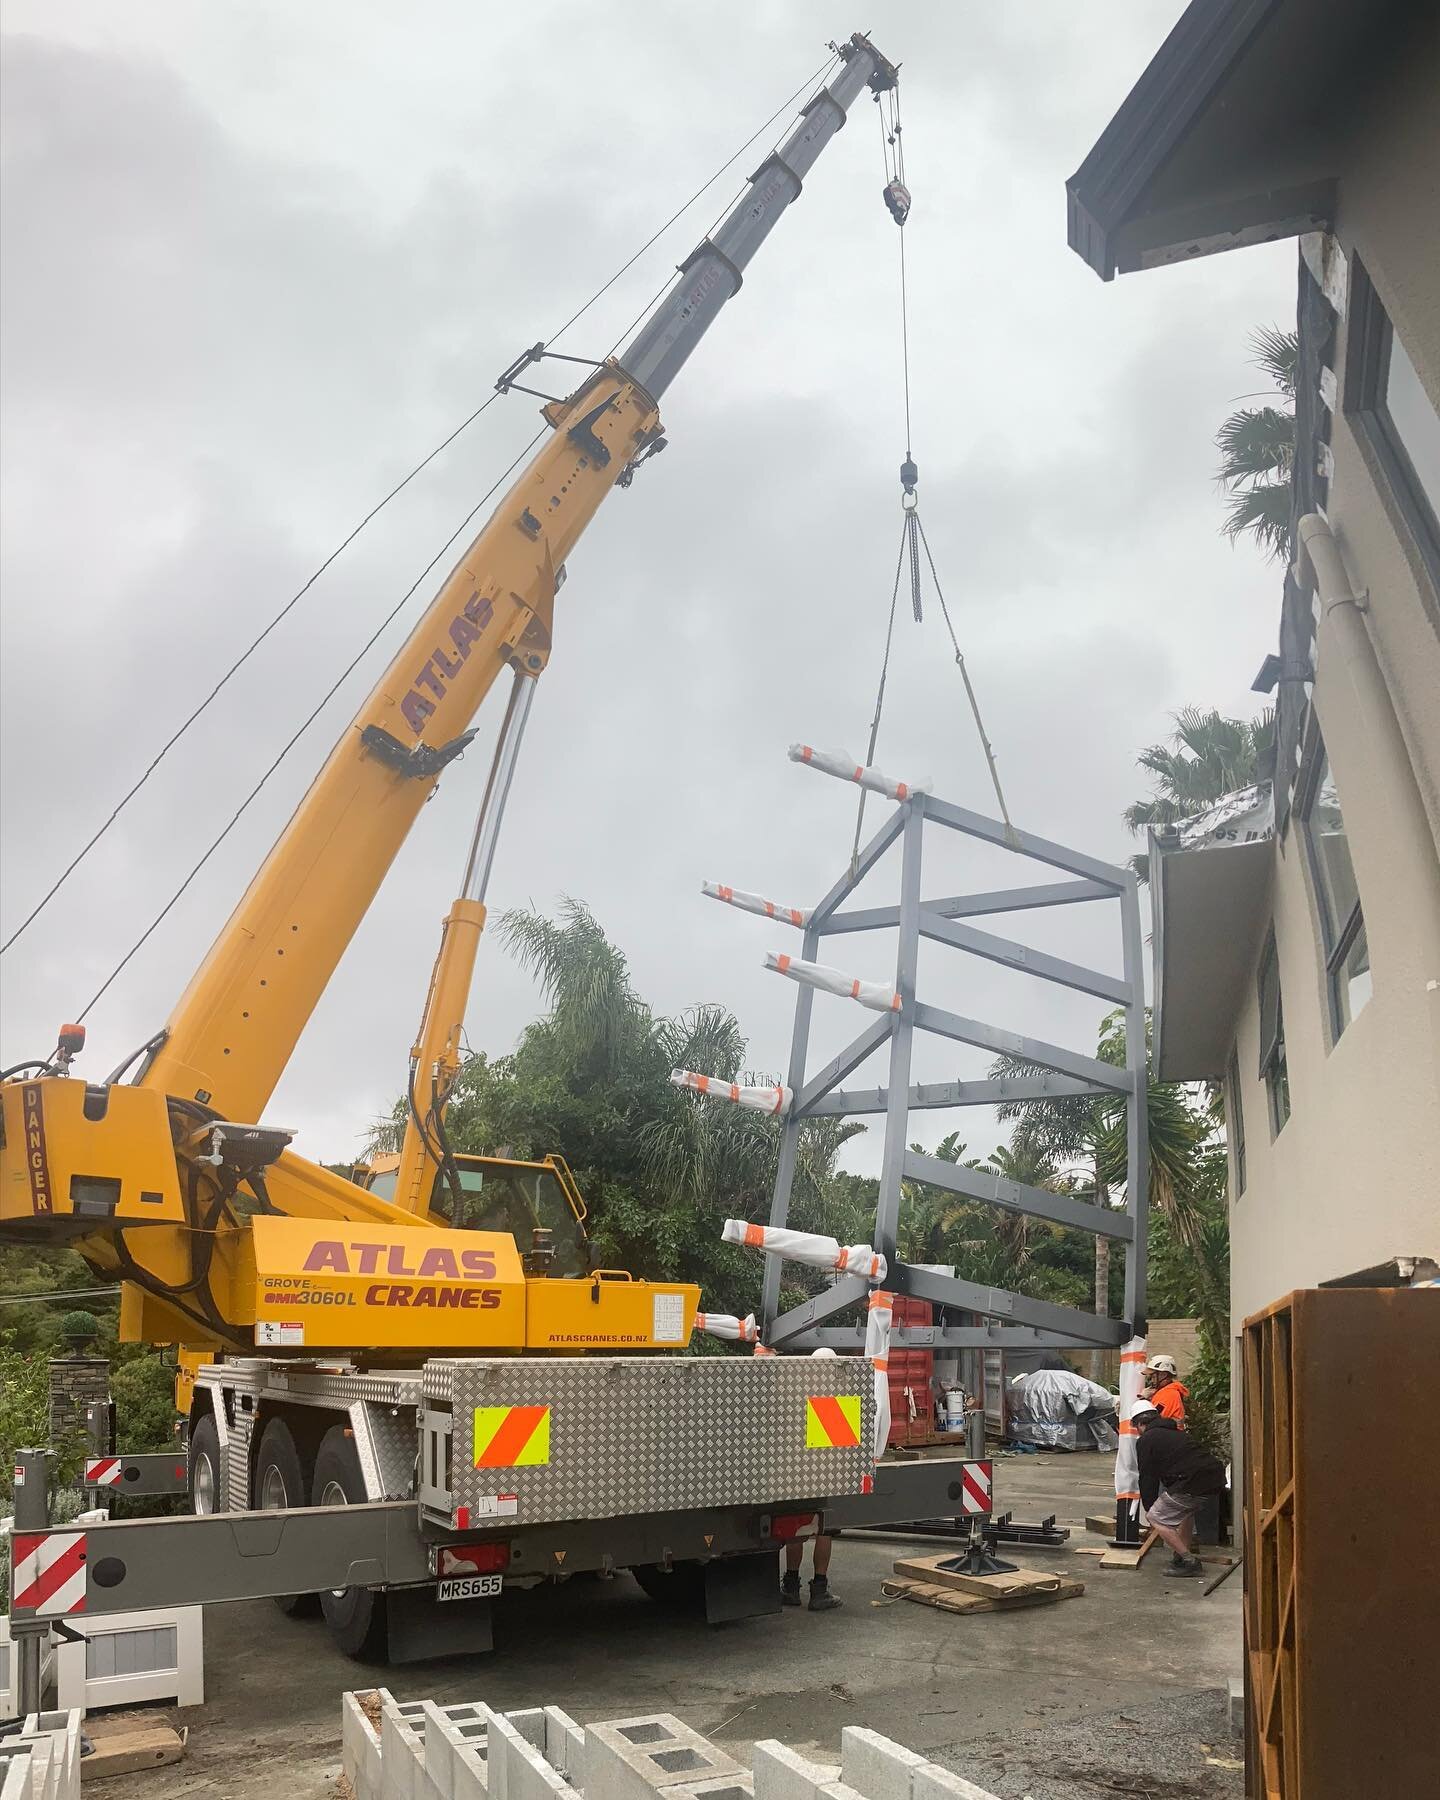 Atlas Cranes onsite this morning lifting the engineered steel into place for an extension in Parua Bay. This is going to mean we can pull the corner of the building out giving extra space to the living areas and a whole new space in what was the loft